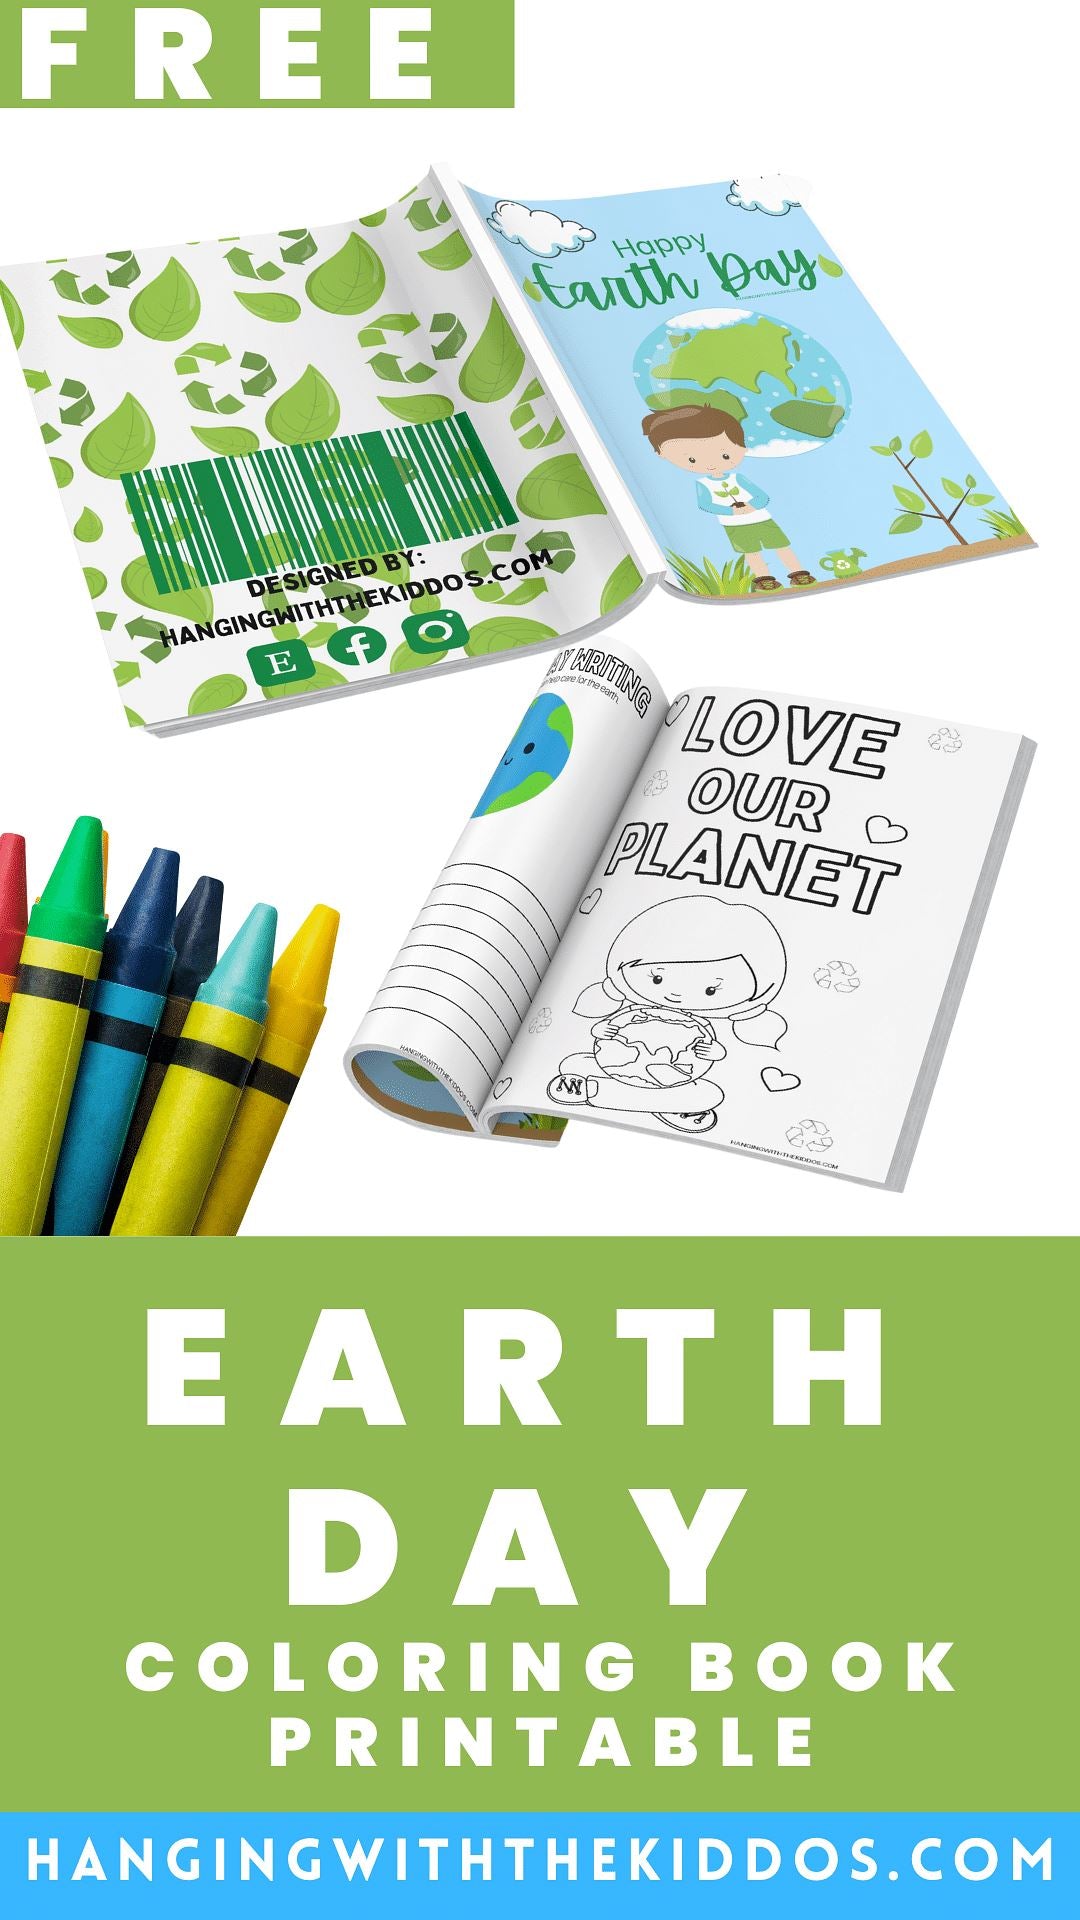 EARTH DAY COLORING BOOK